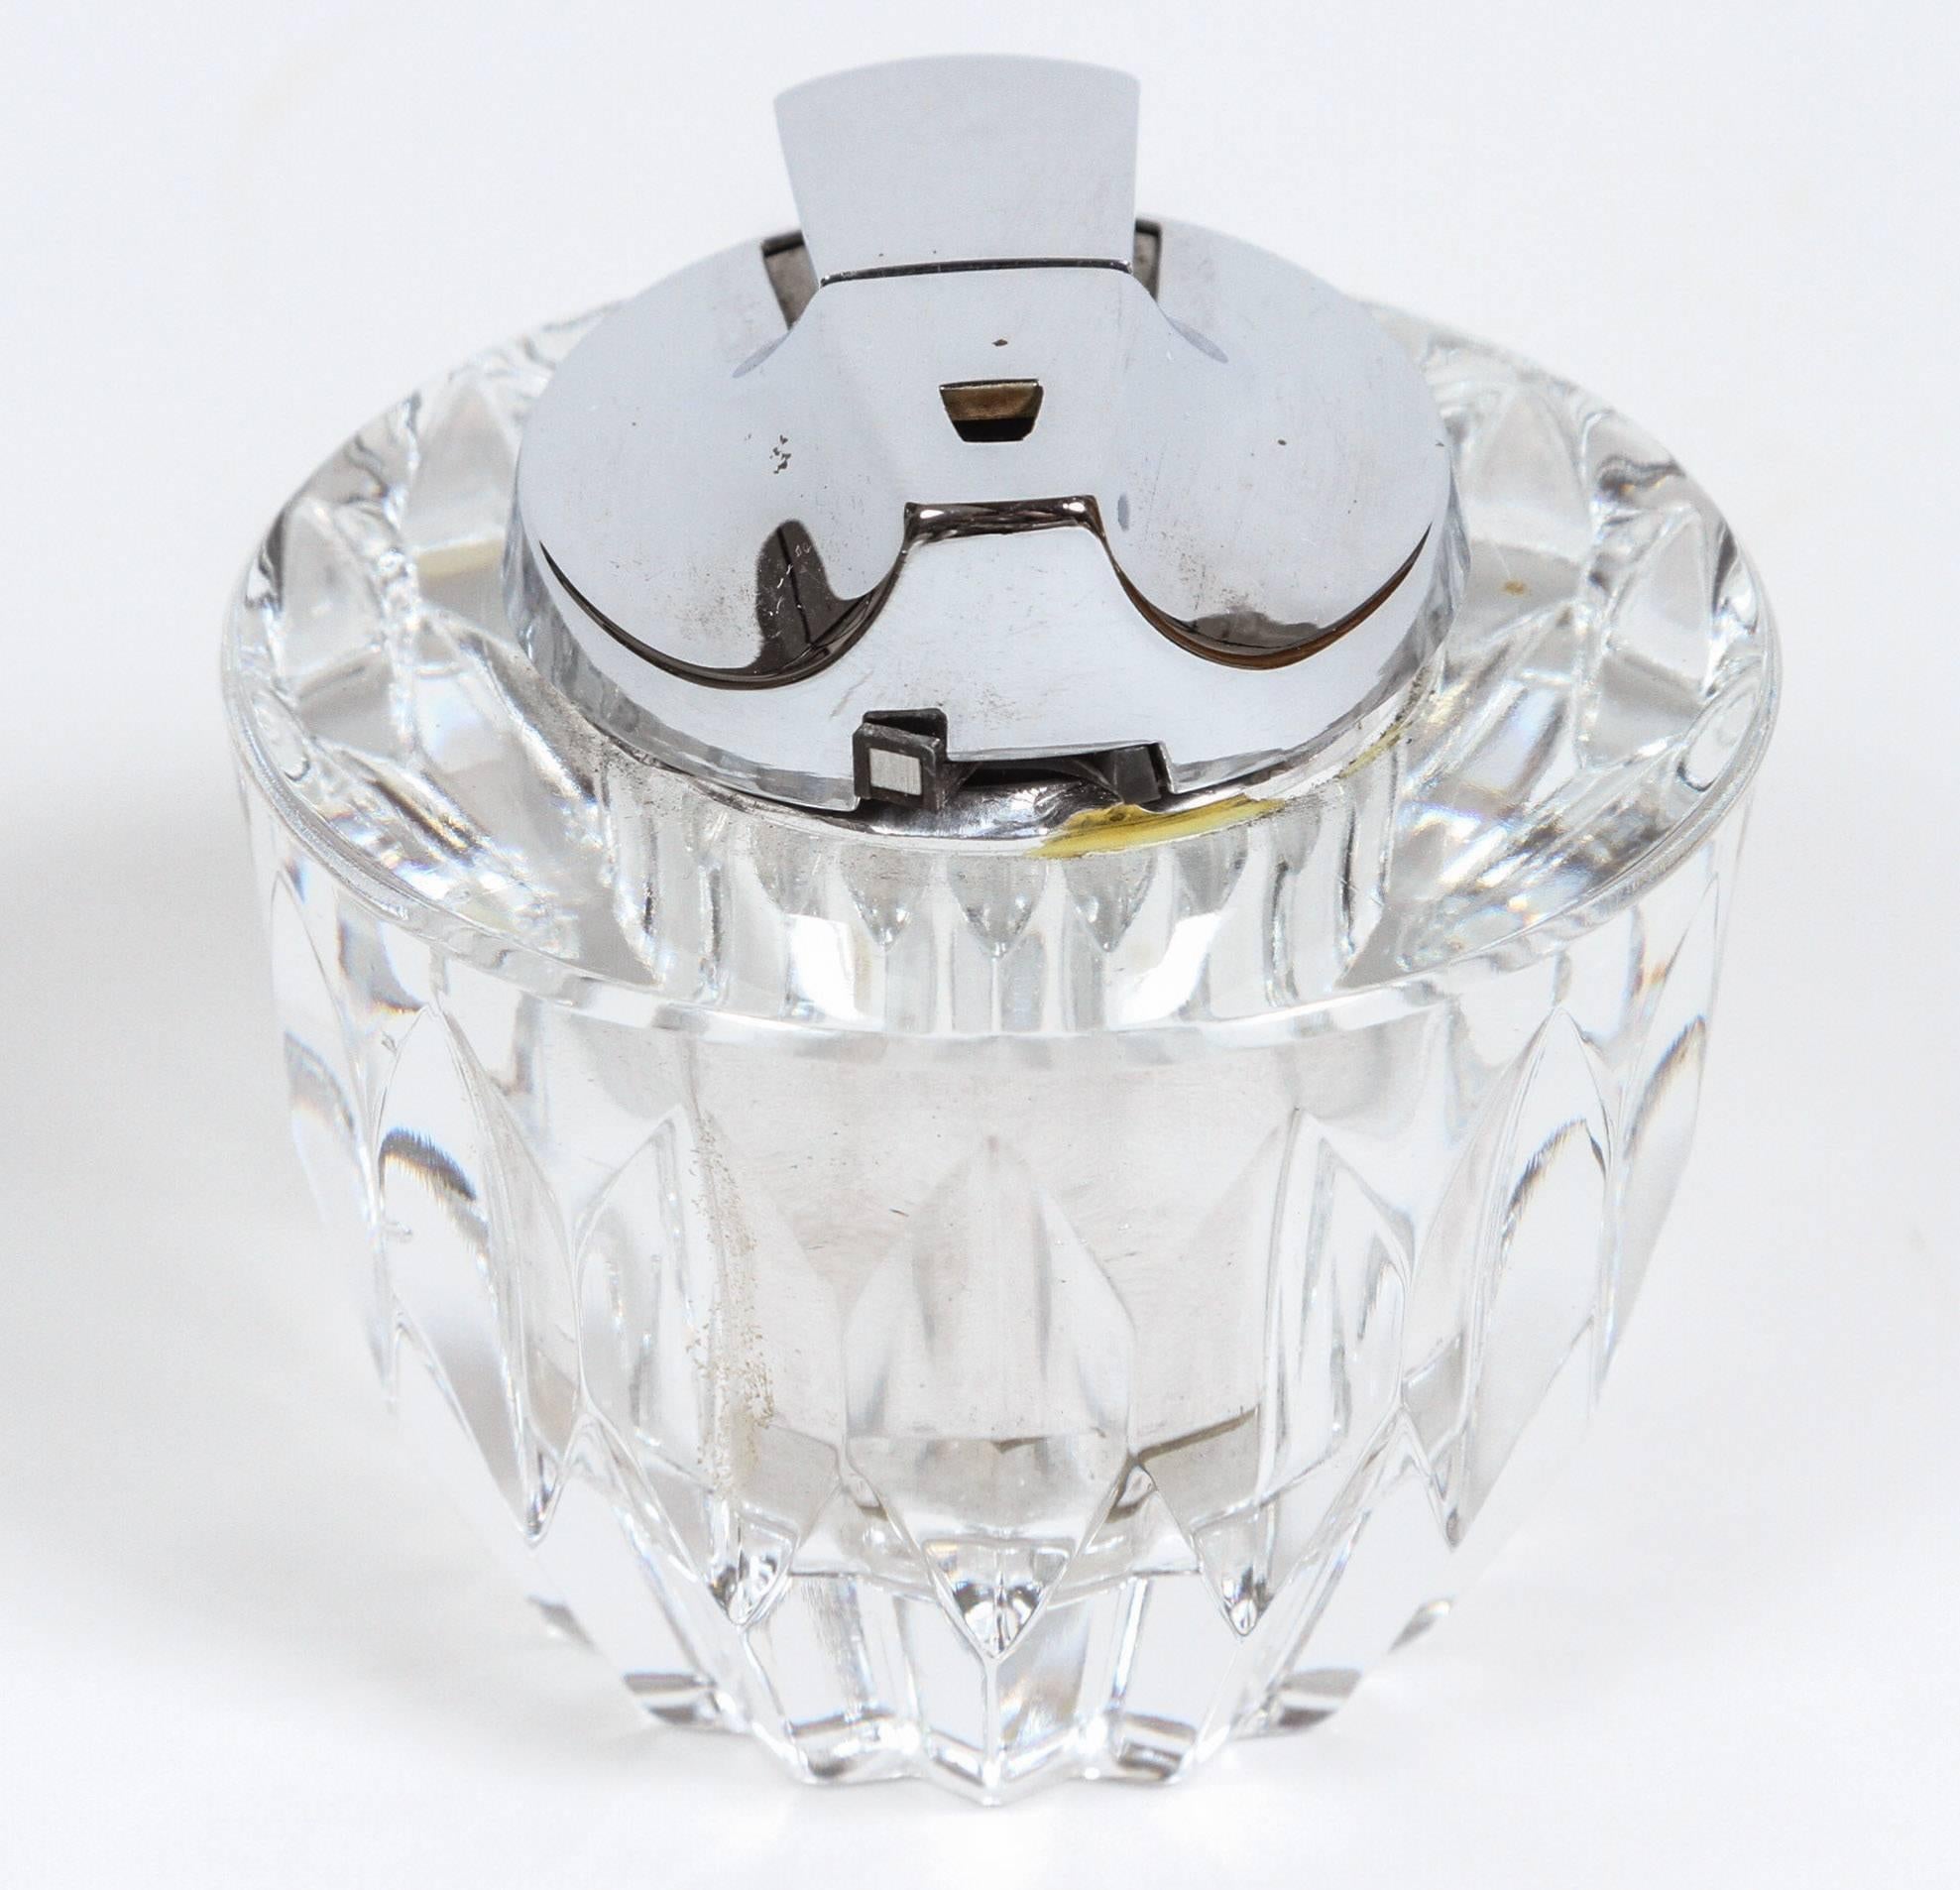 Ronson cut clear crystal table lighter.
Made in France. 
Makers mark underneath.
Great gift for him, Father's Day.